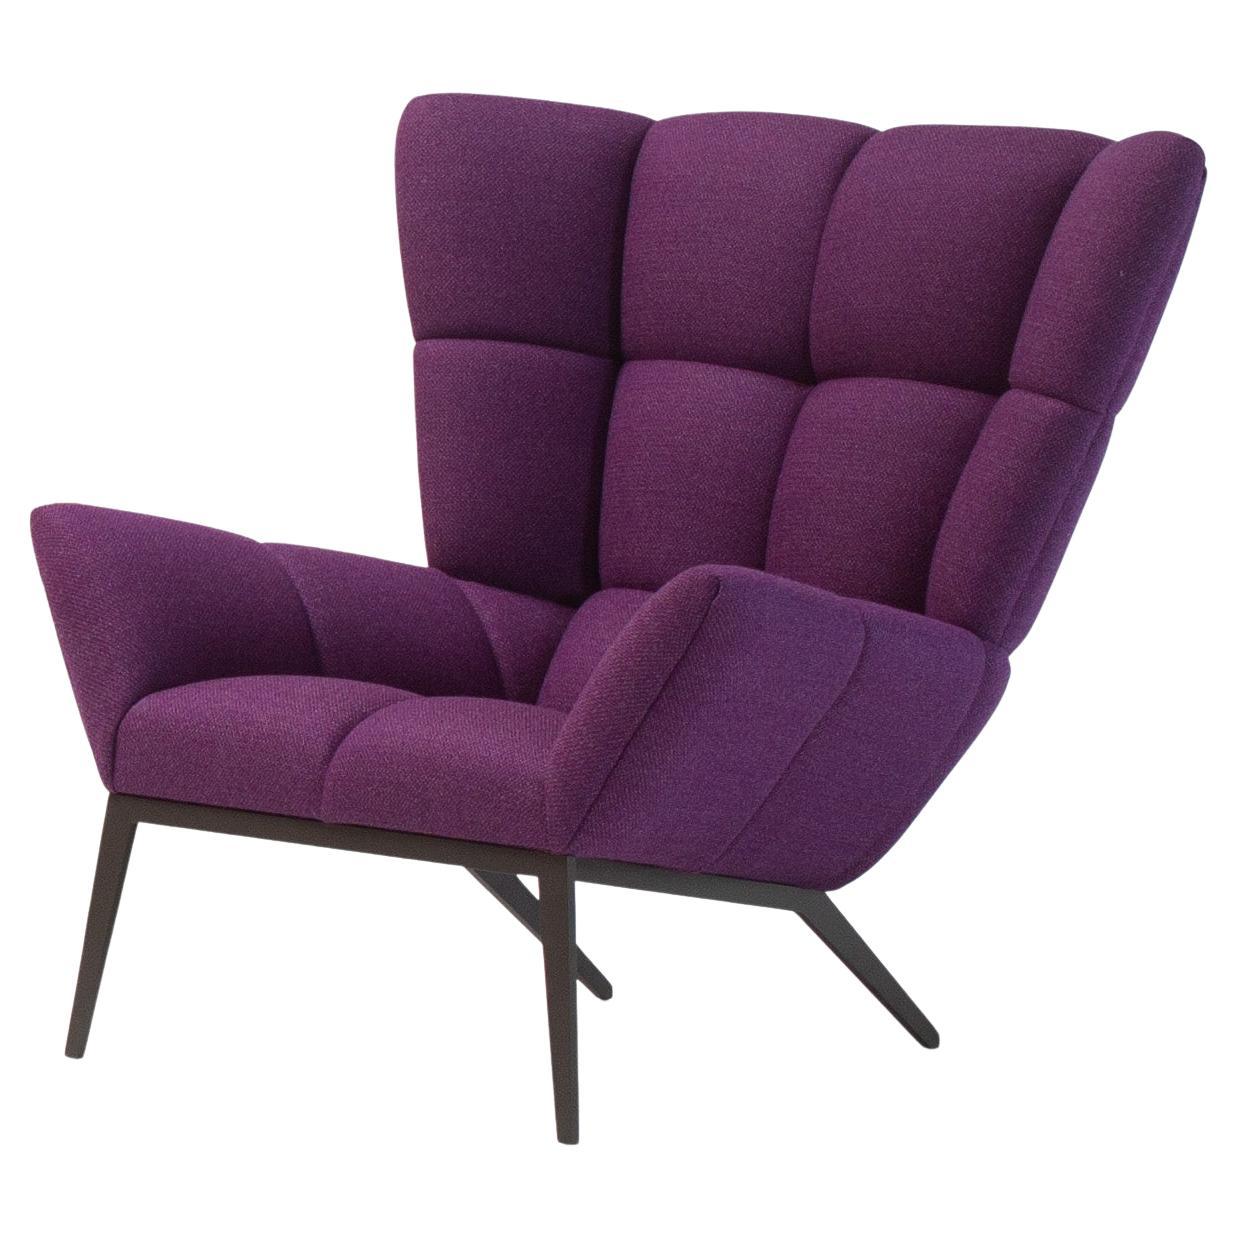 Vioski New Century Modern Tufted Tuulla Lounge Chair in Orchid Purple For Sale